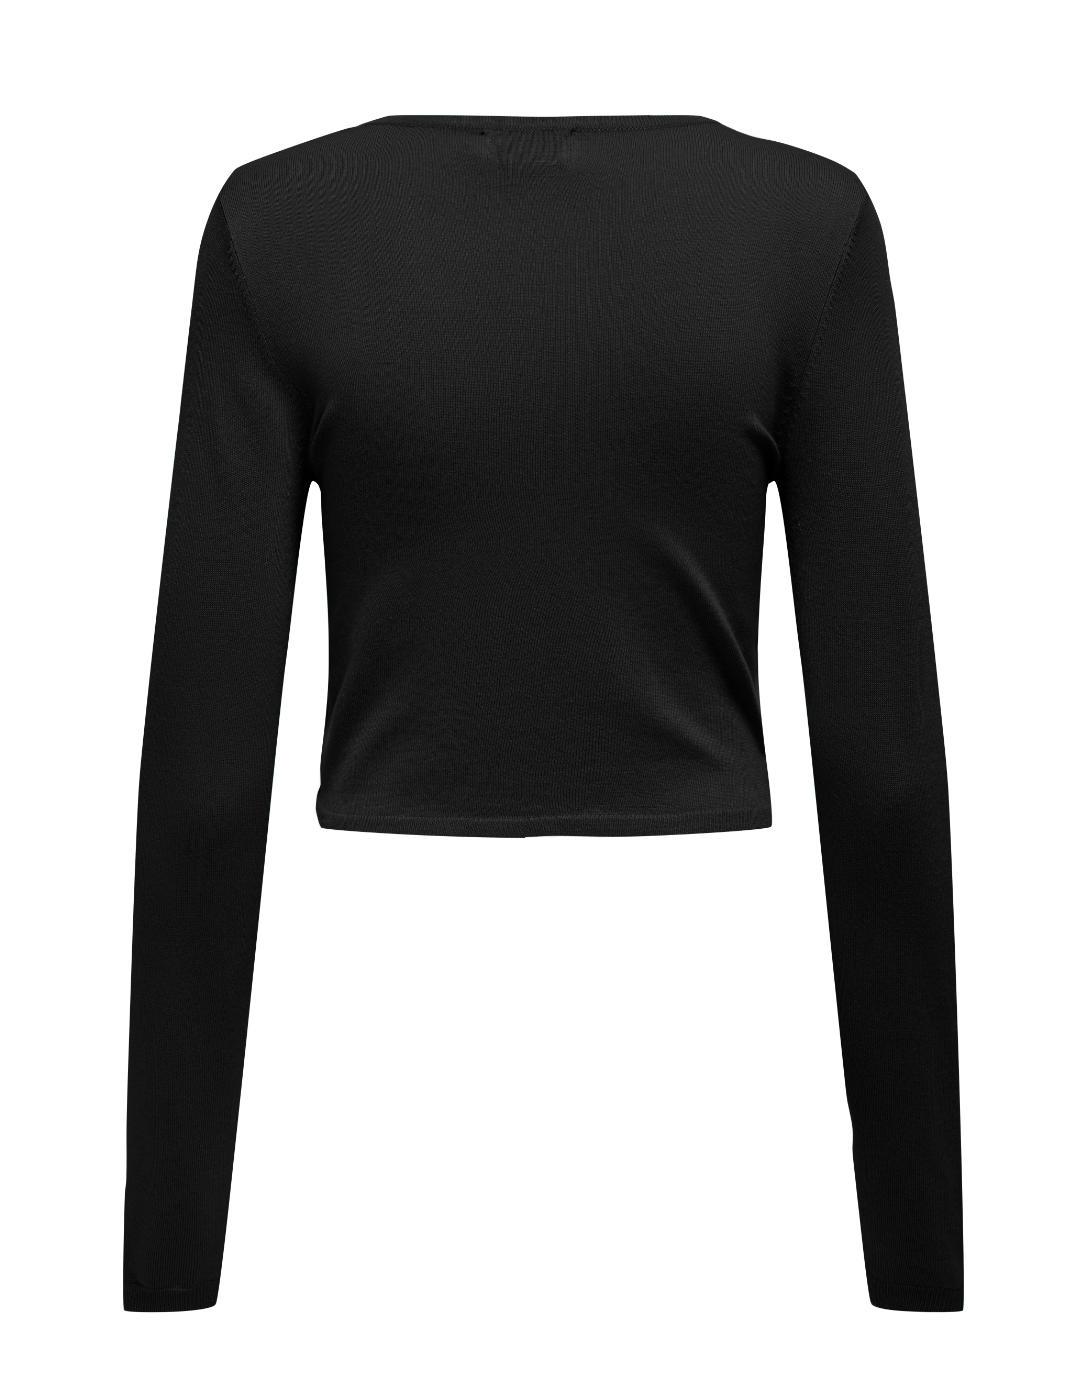 Top cropped Only Lilian detalle cuello negro mujer